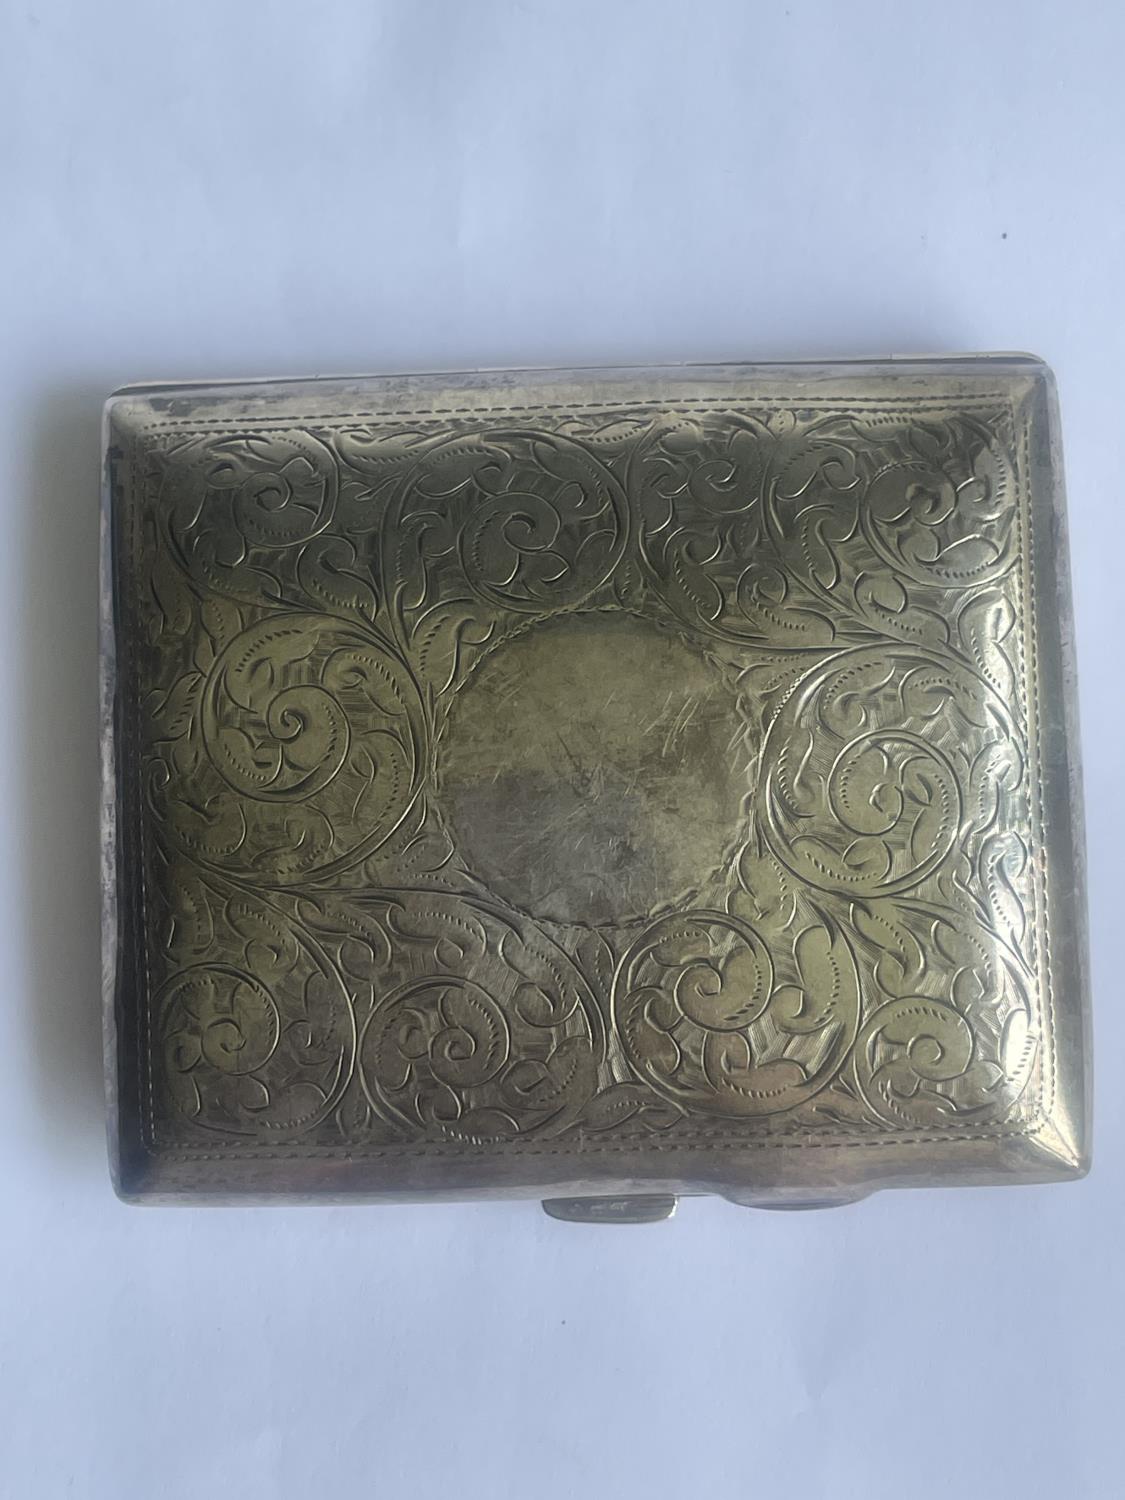 A HALLMARKED CHESTER SILVER CIGARETTE CASE GROSS WEIGHT 94 GRAMS